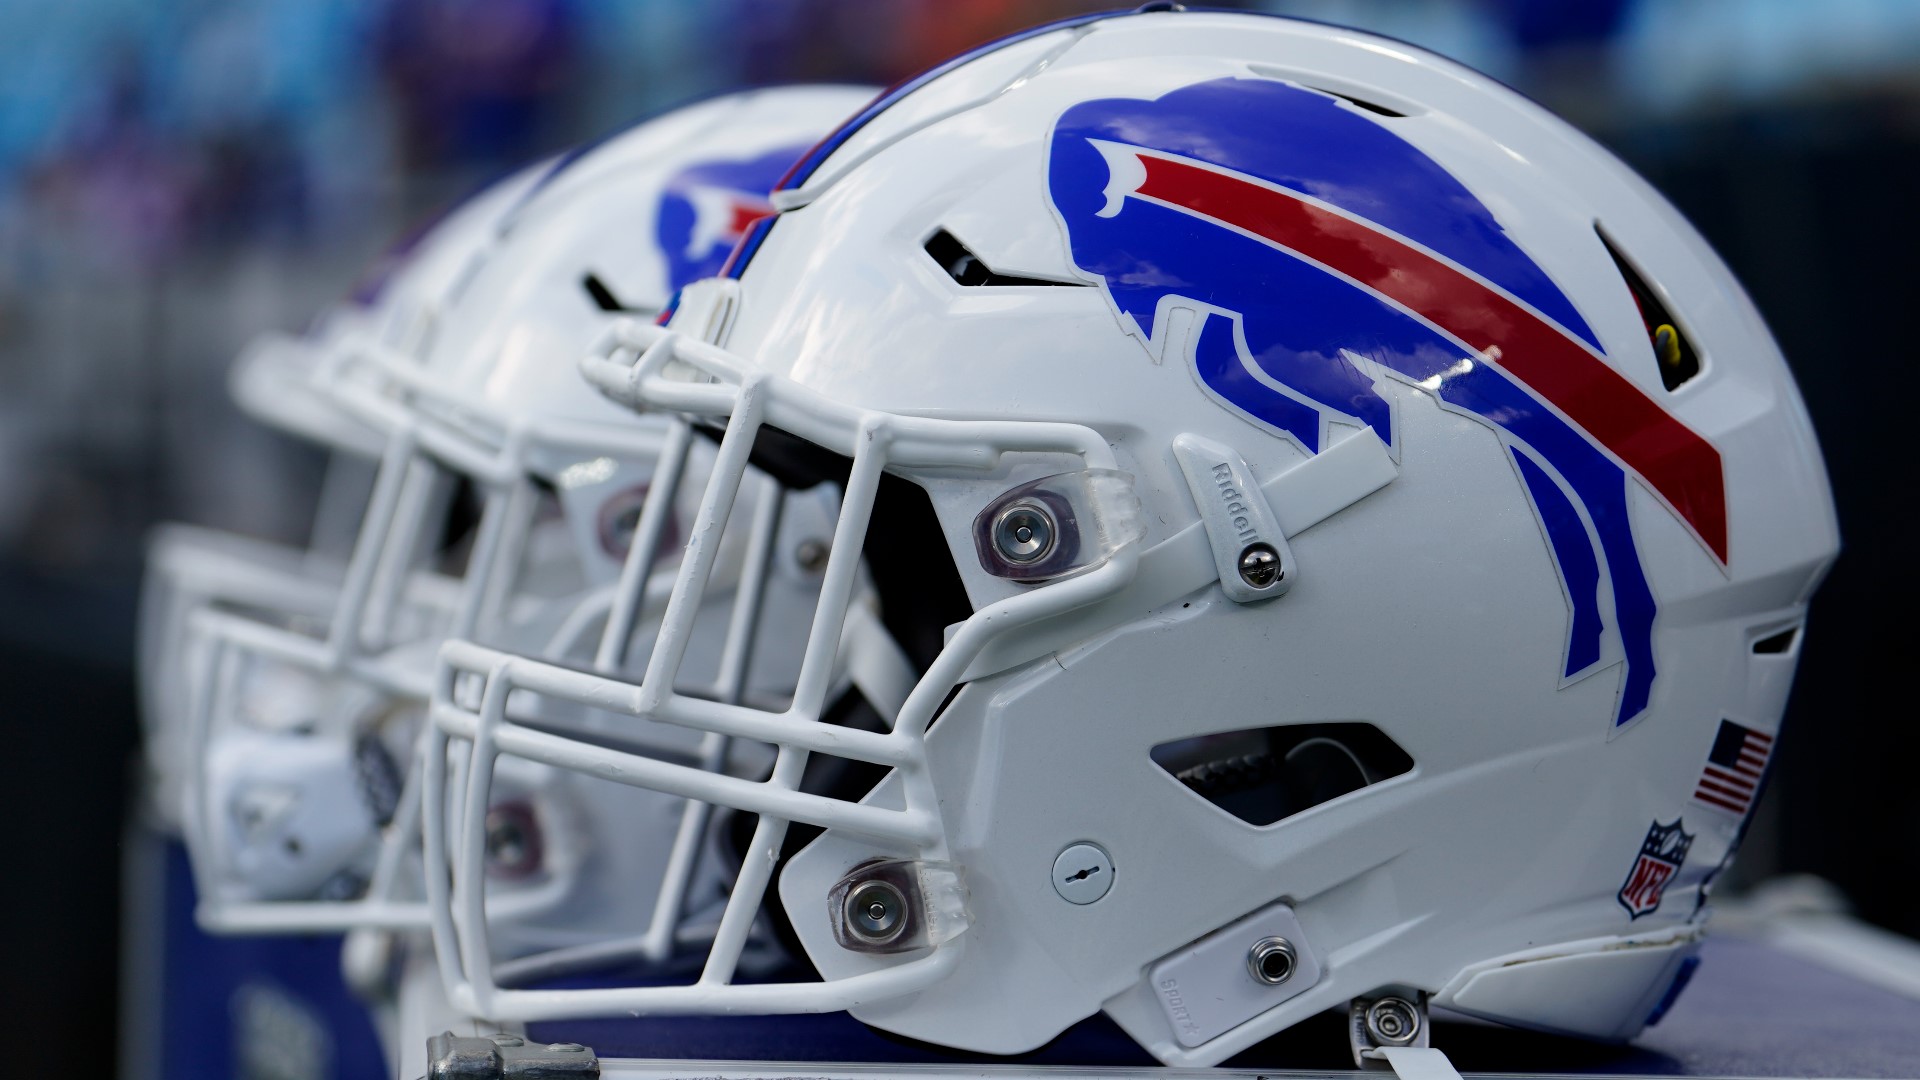 WGRZ's Lindsey Moppert and Joe Marino of Locked On Bills discuss what's next for the Buffalo Bills in free agency and next month's NFL Draft.